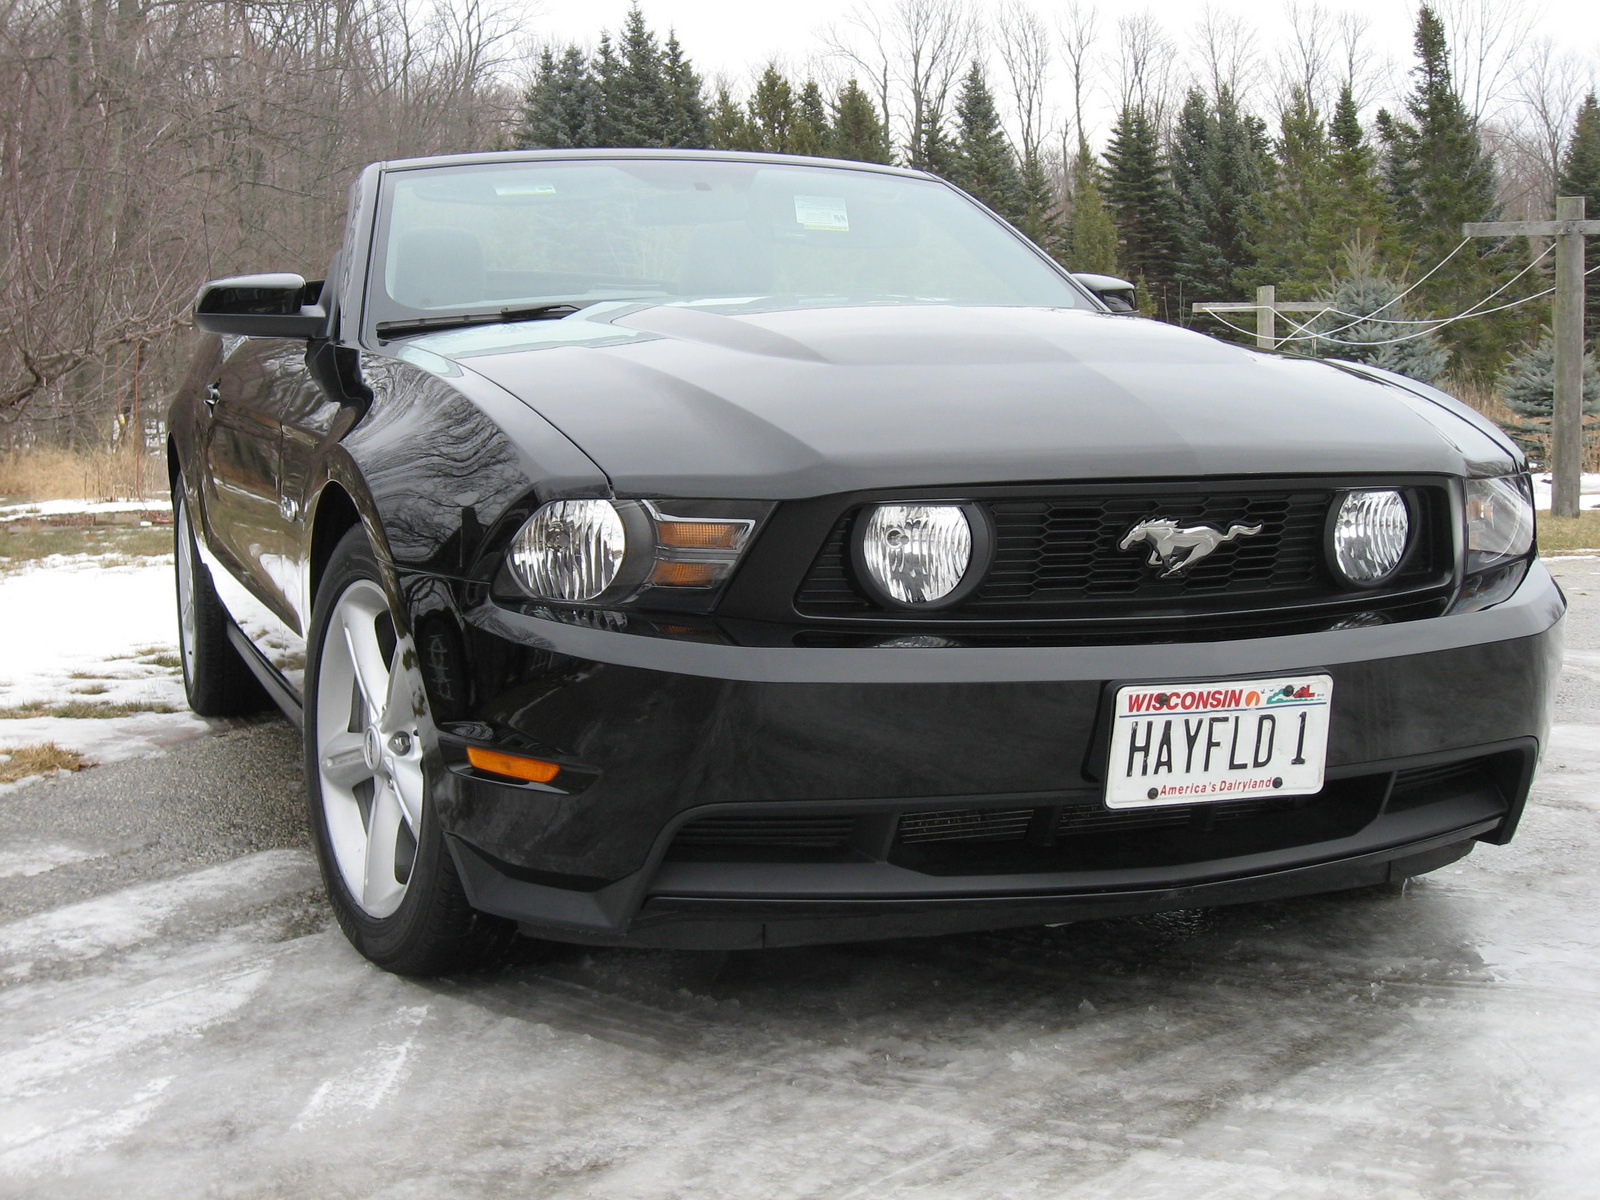 2005 Ford mustang gt convertible owners manual #1